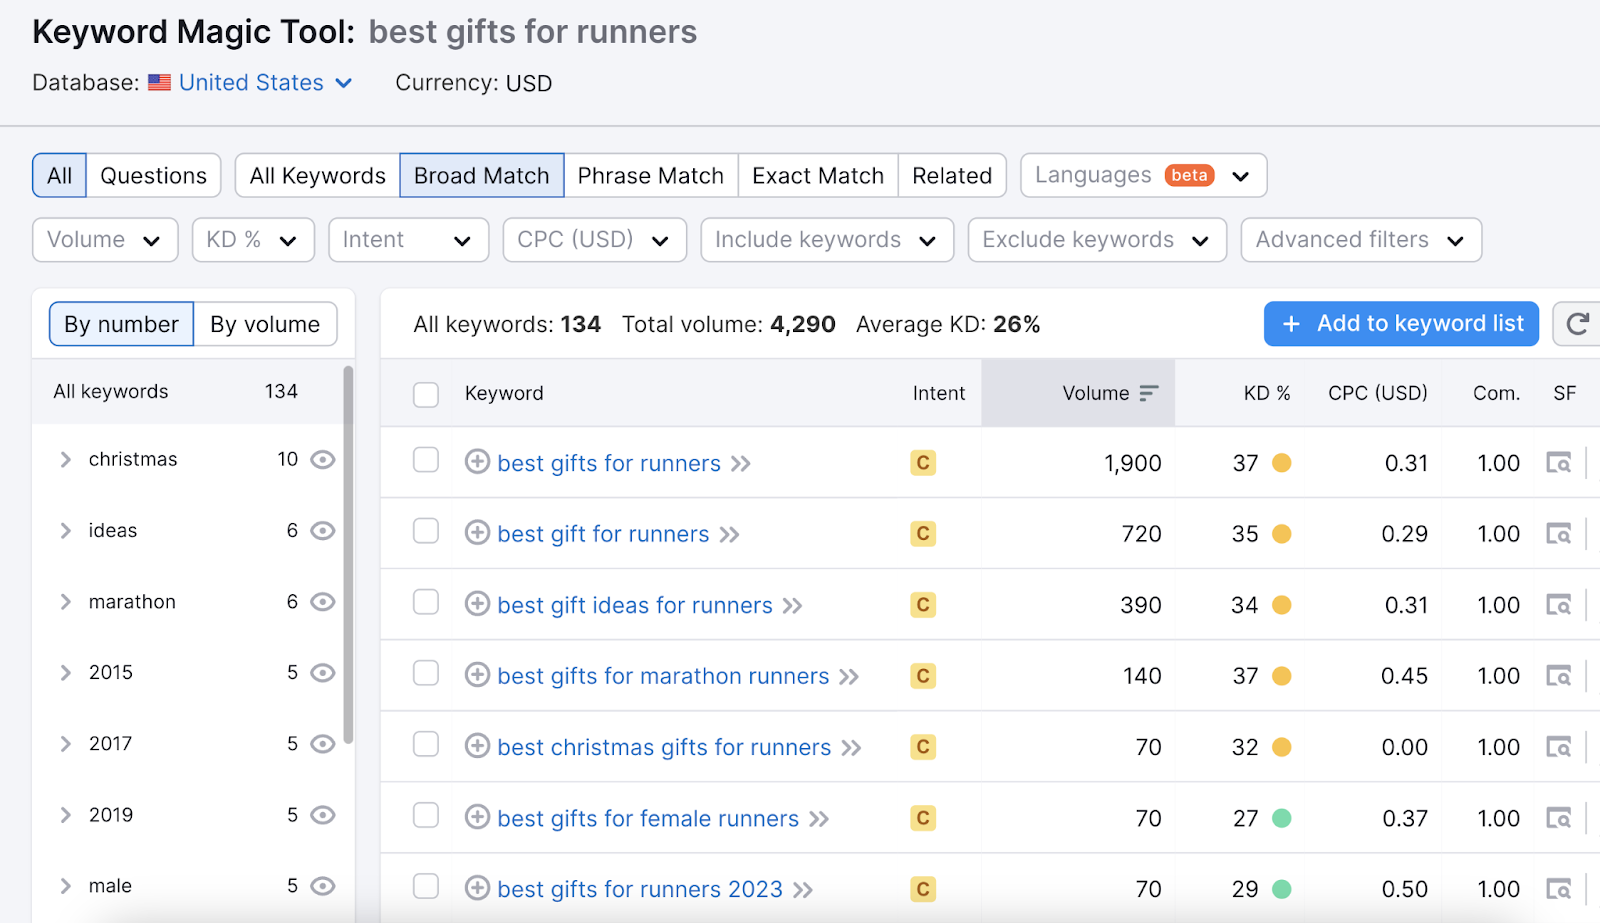 Keyword Magic Tool results for best gifts for runners